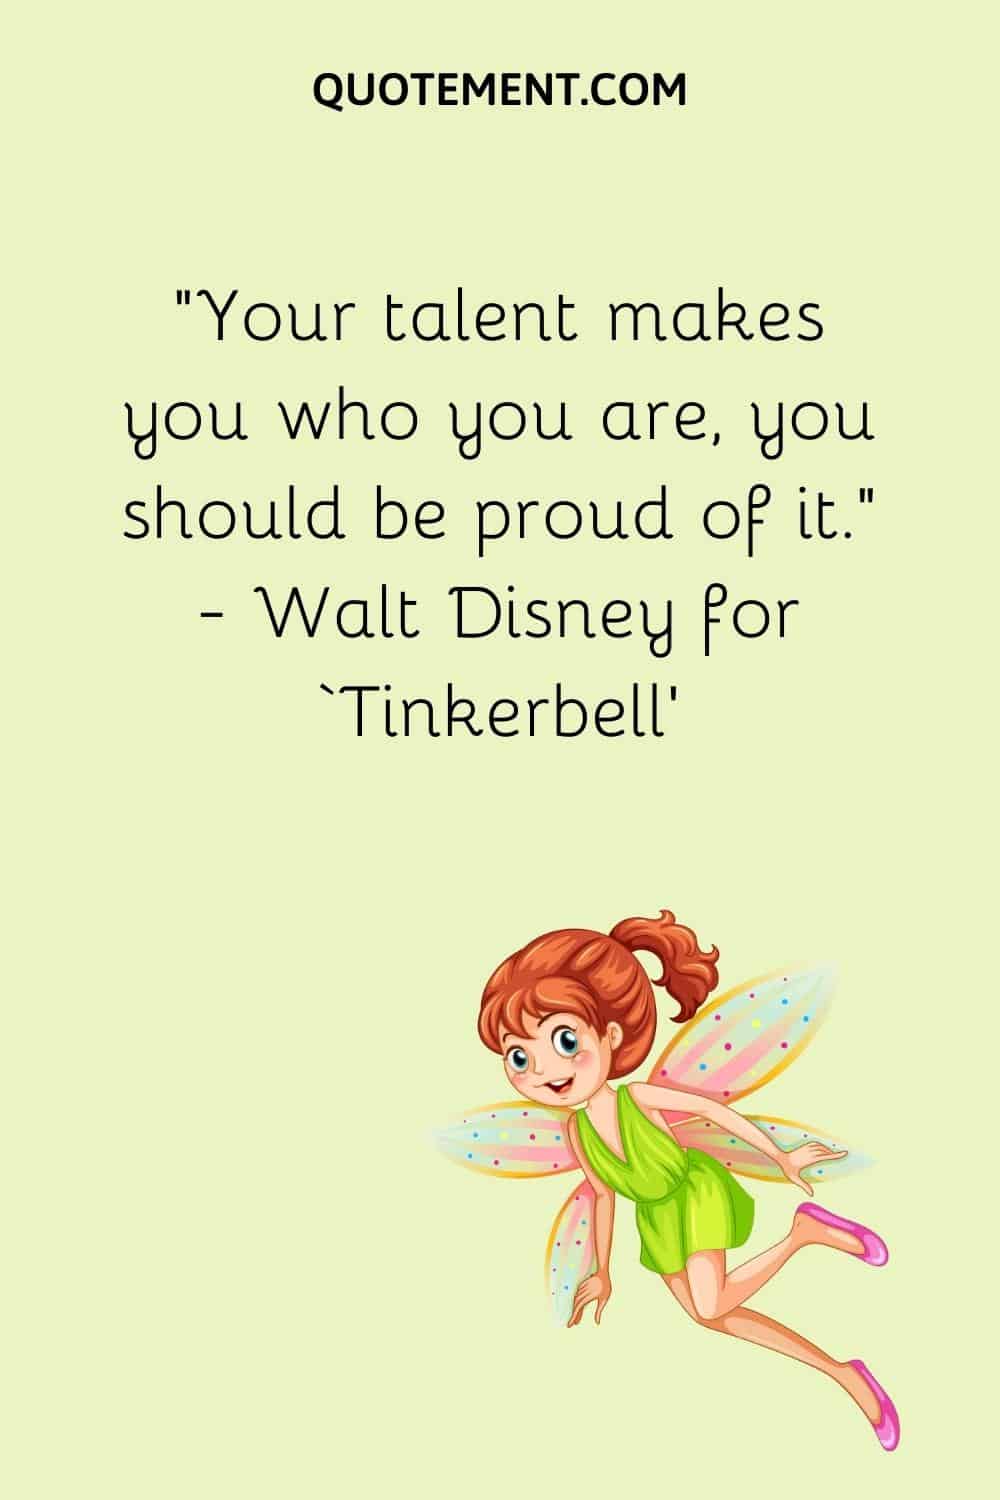 Your talent makes you who you are, you should be proud of it